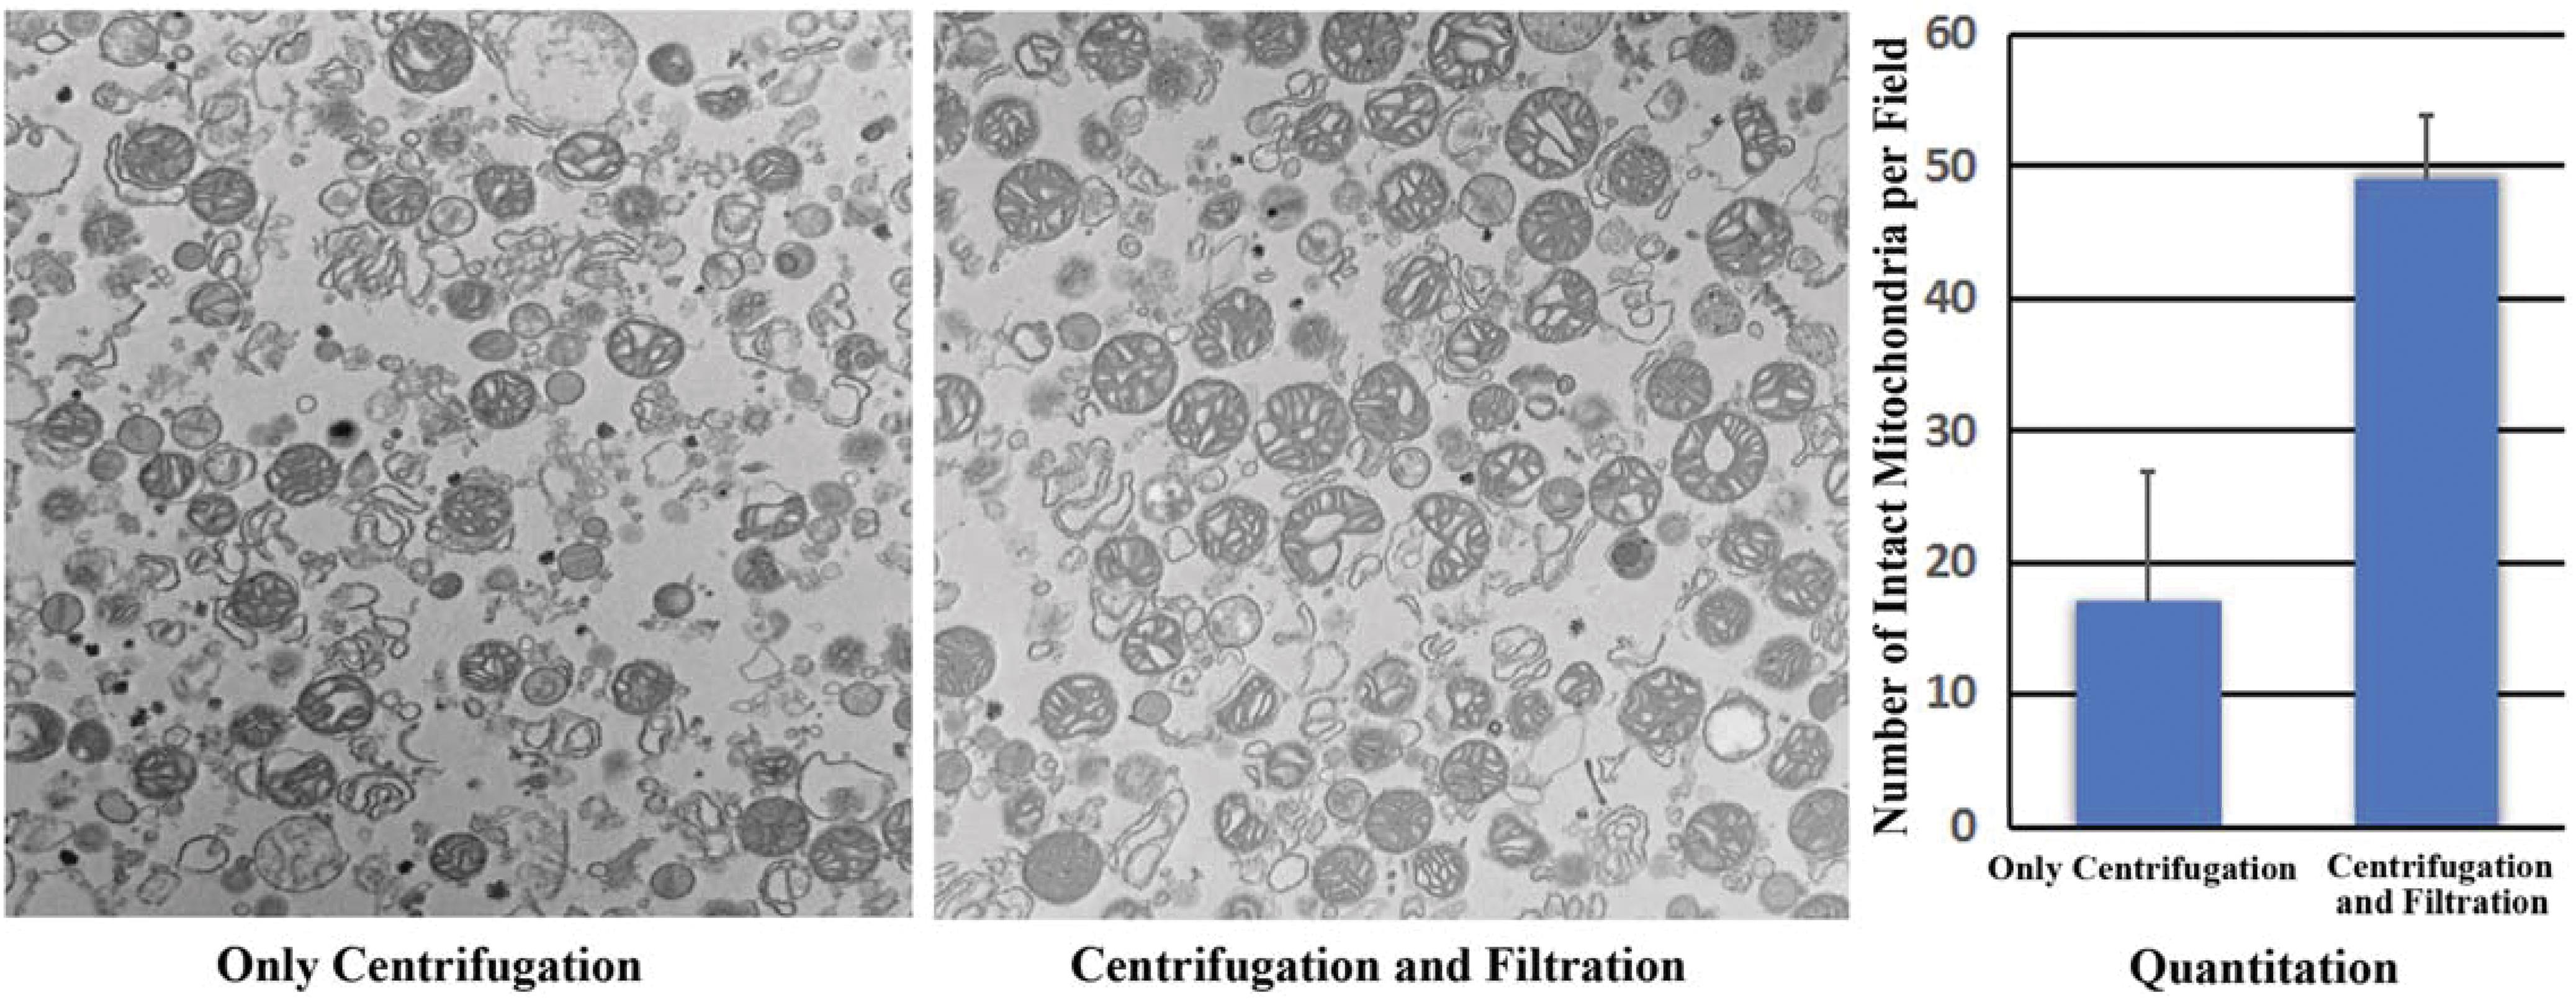 Quantitative effects of filtration on purity of mitochondrial preparation purity.